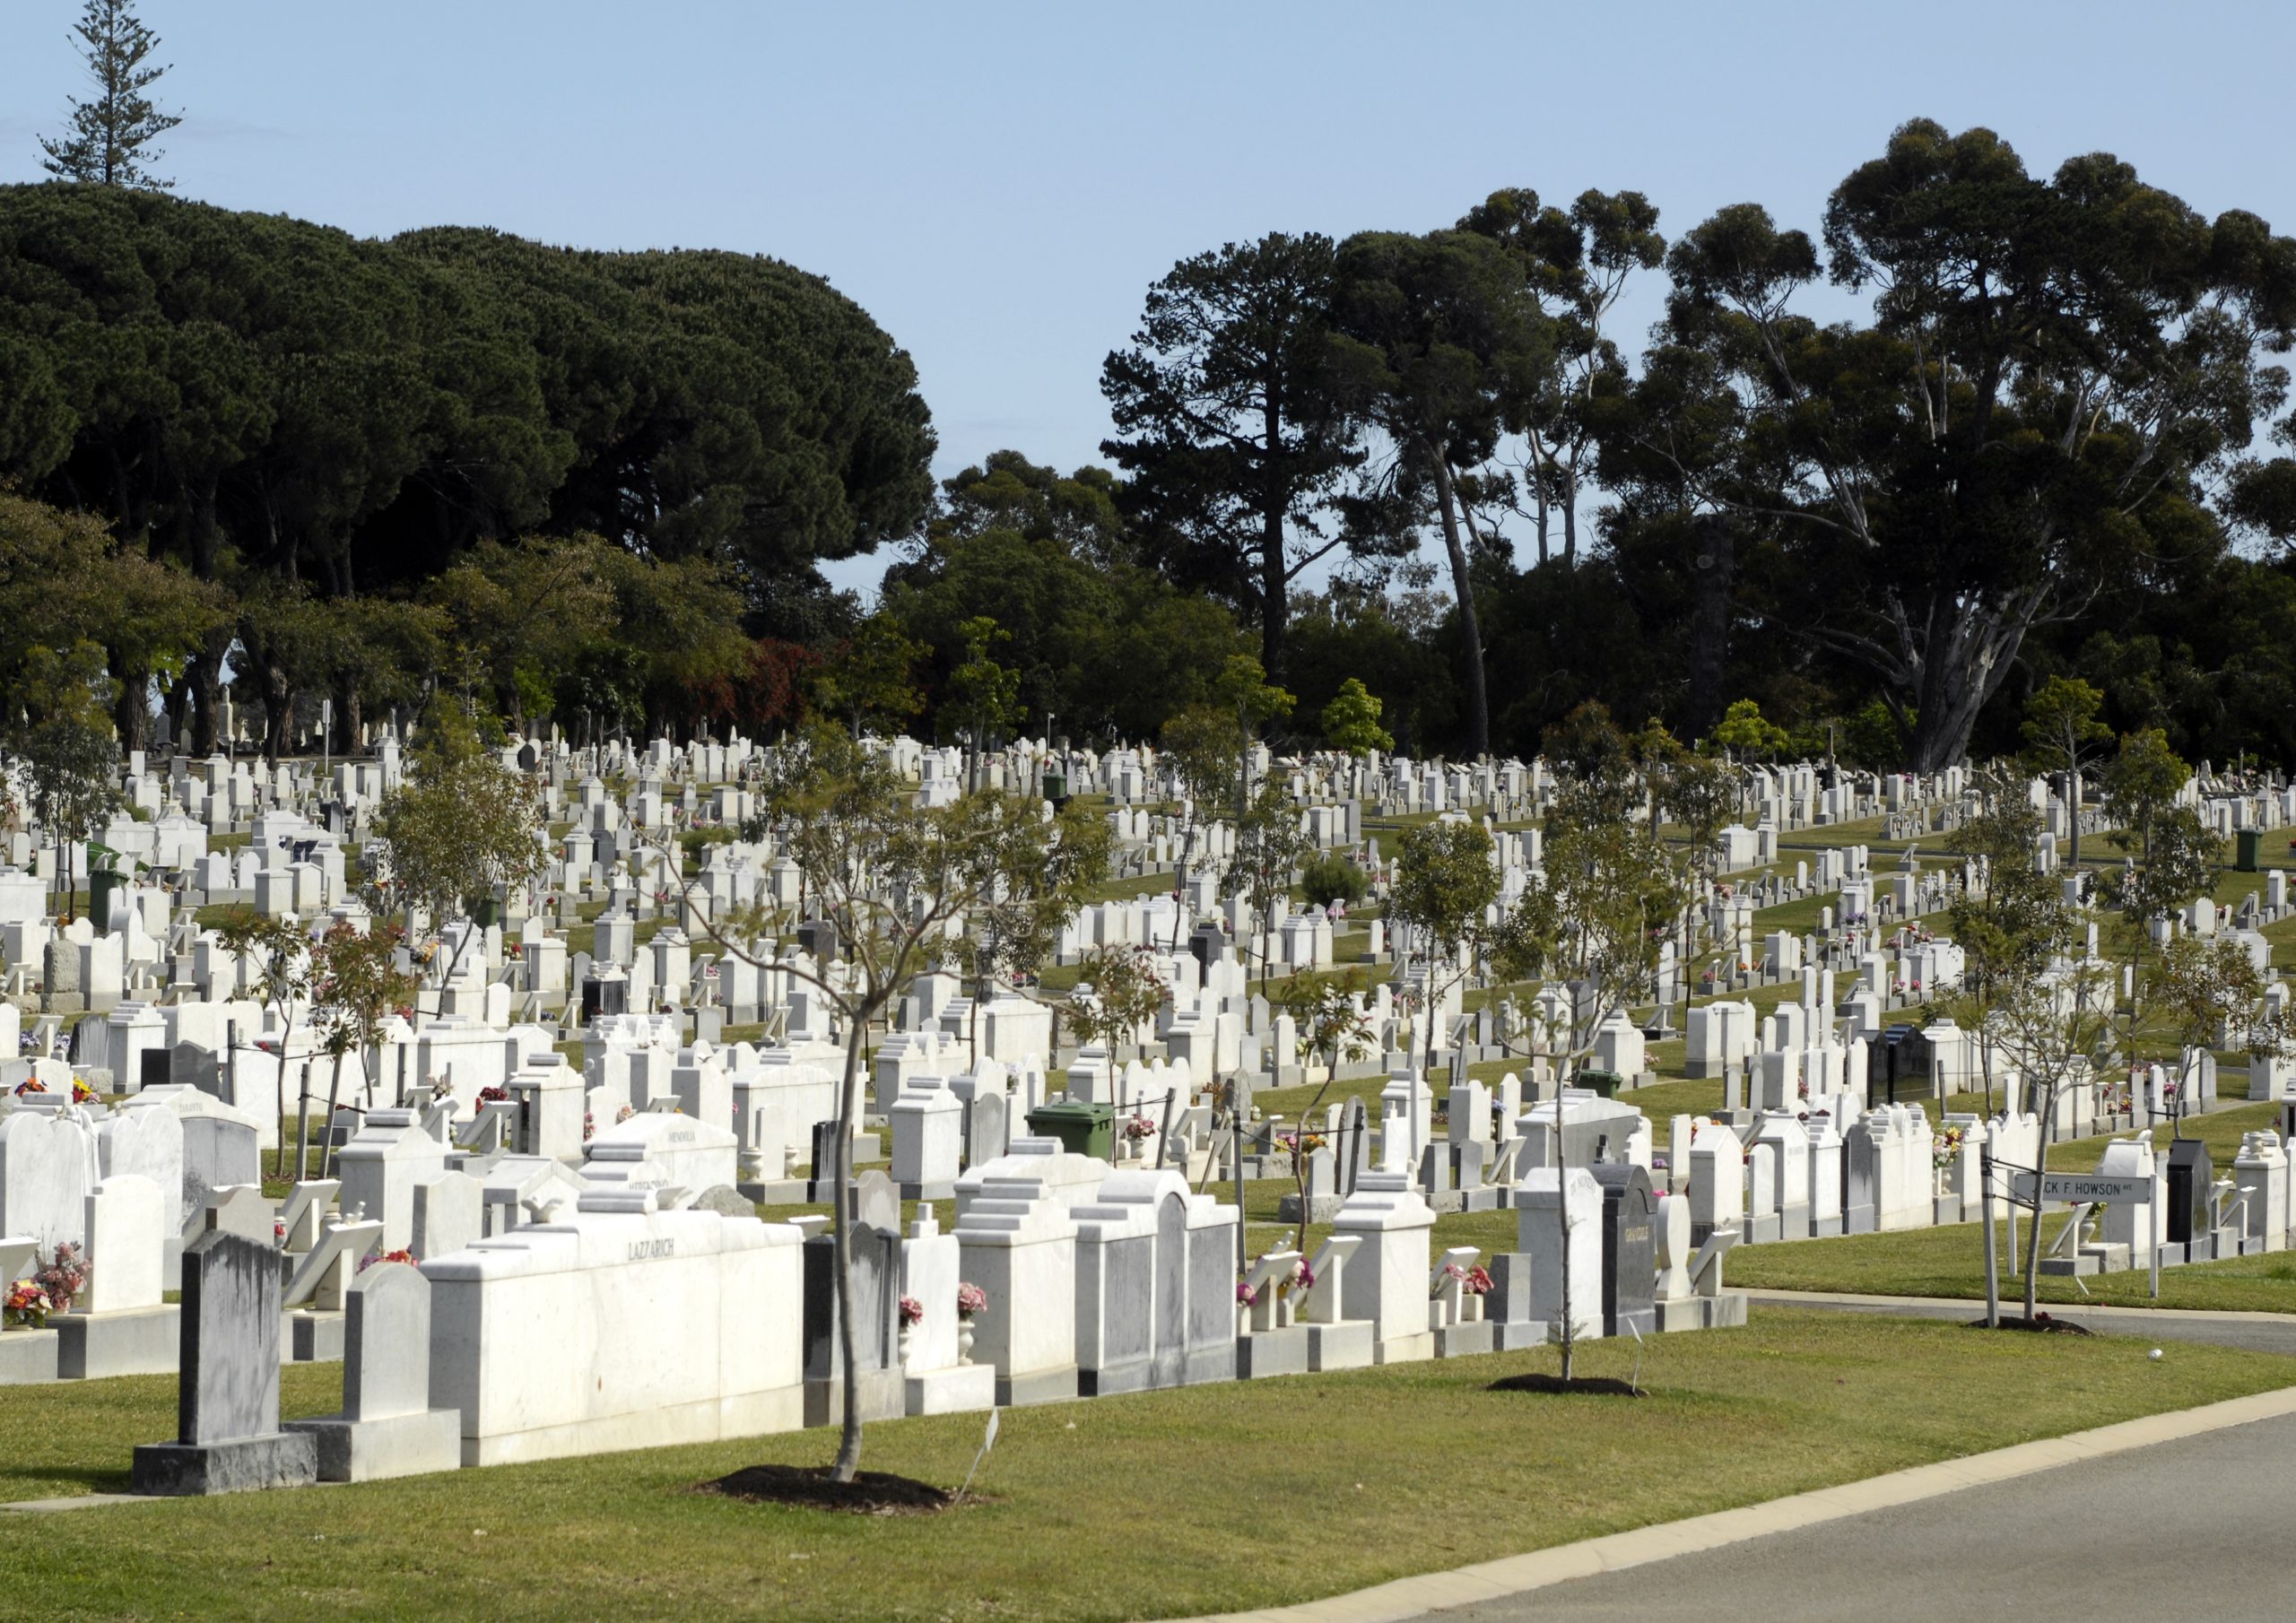 Monumental burial areas of Fremantle Cemetery